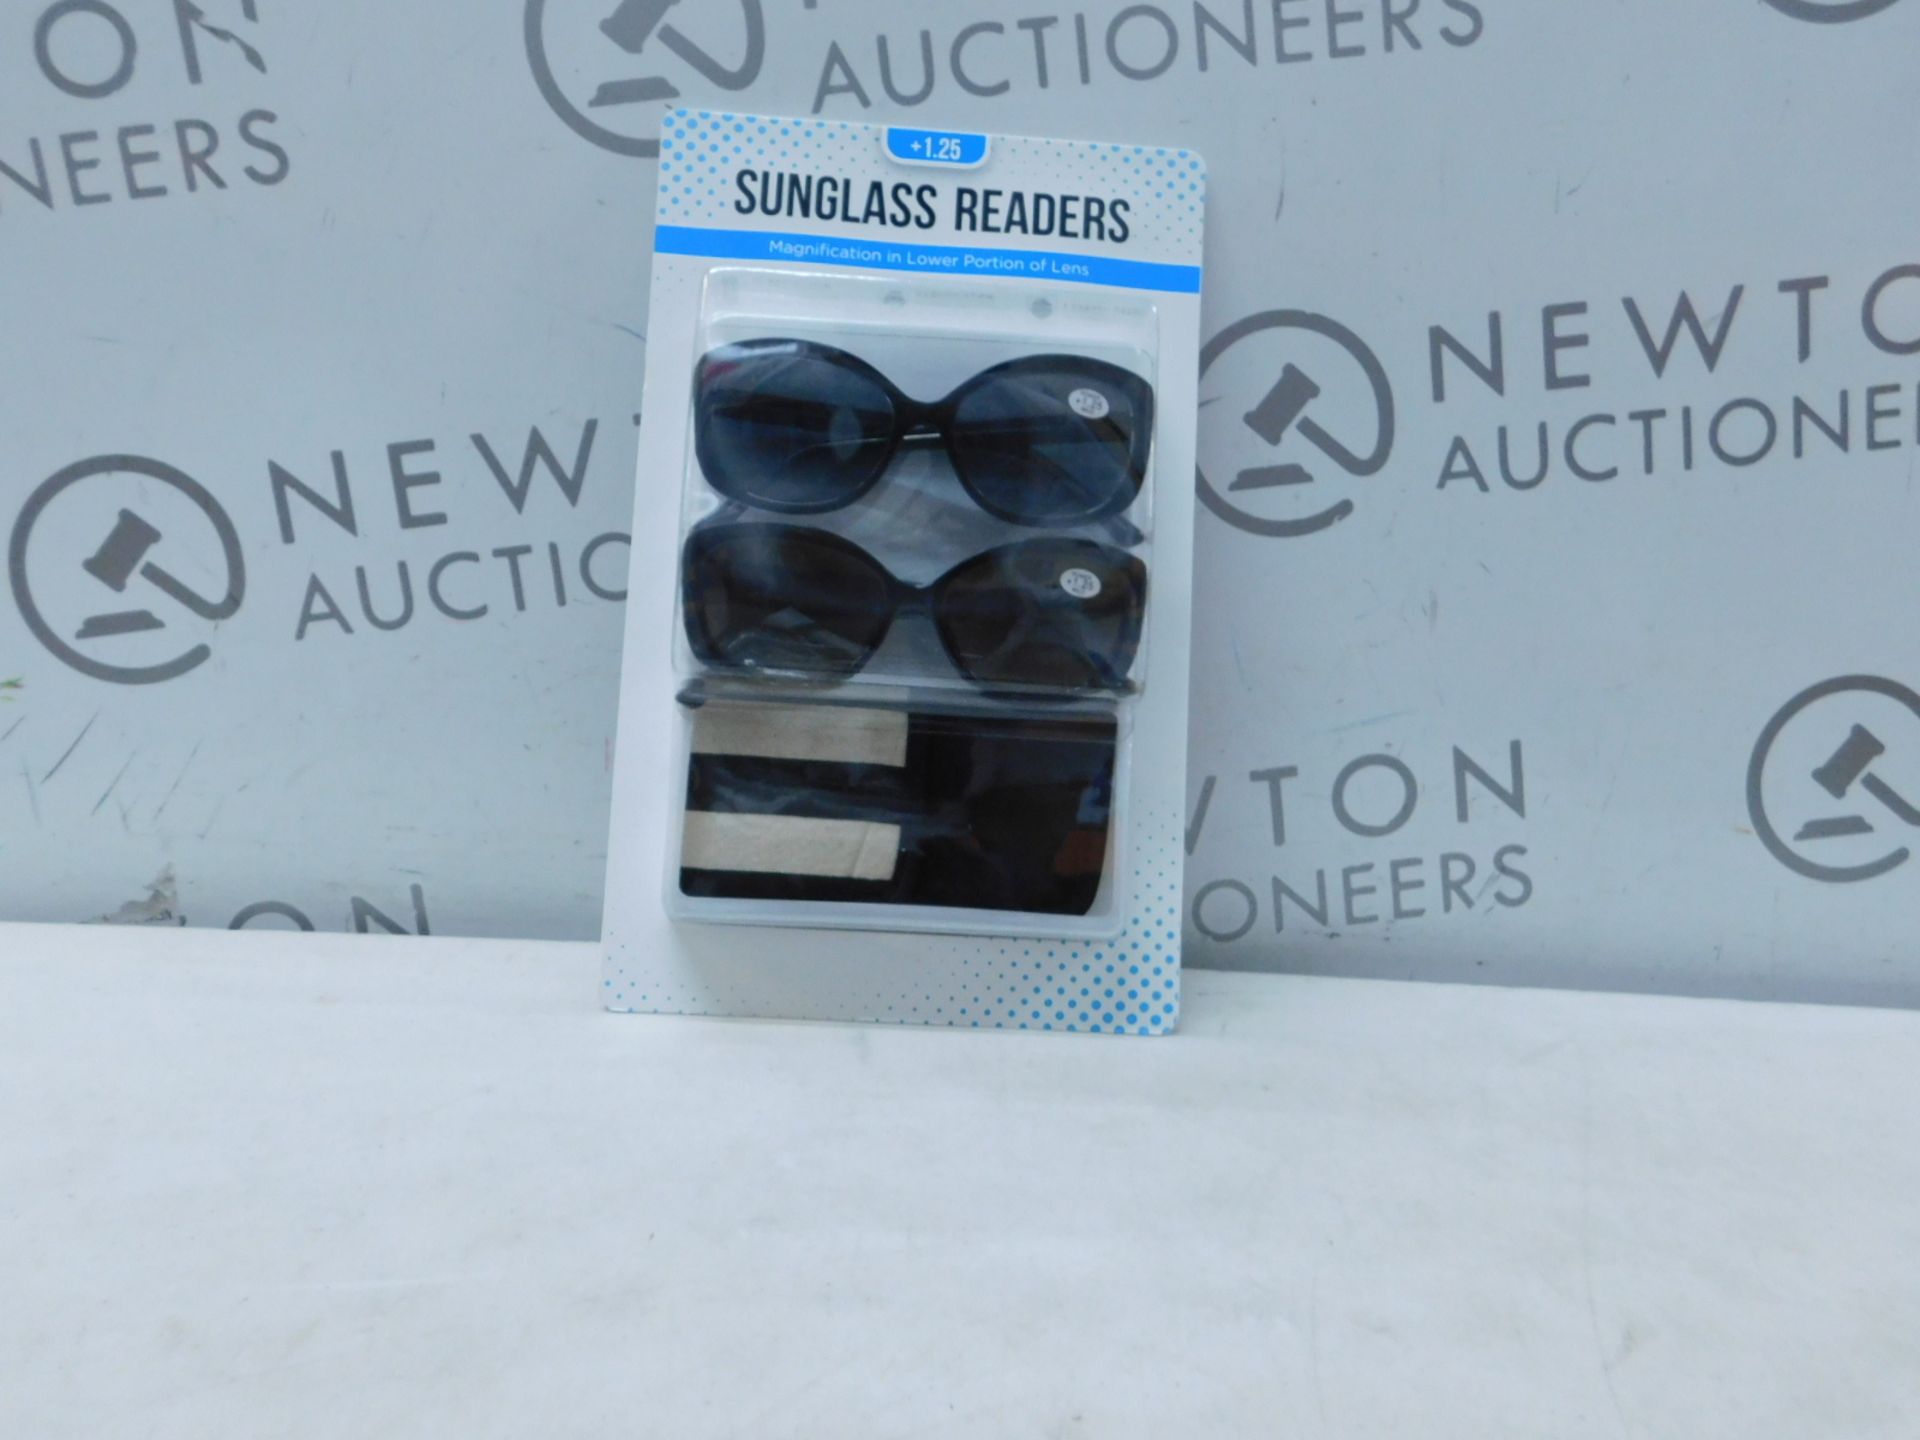 1 BRAND NEW PACK OF SUNGLASS READERS IN +1.25 STRENGTH RRP Â£19.99